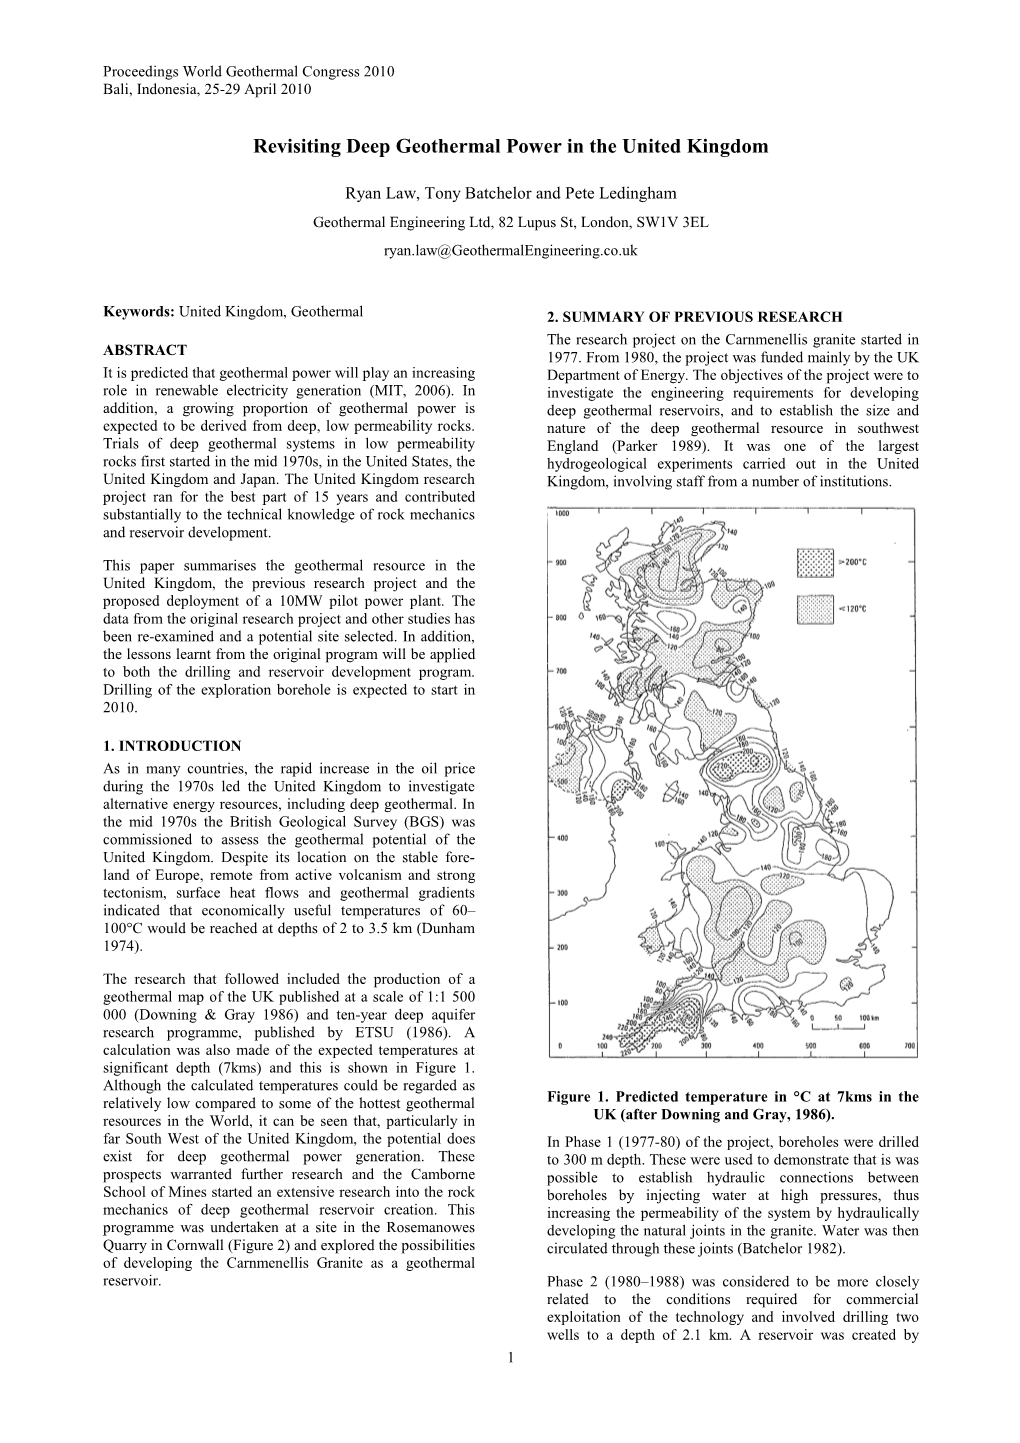 Revisiting Deep Geothermal Power in the United Kingdom